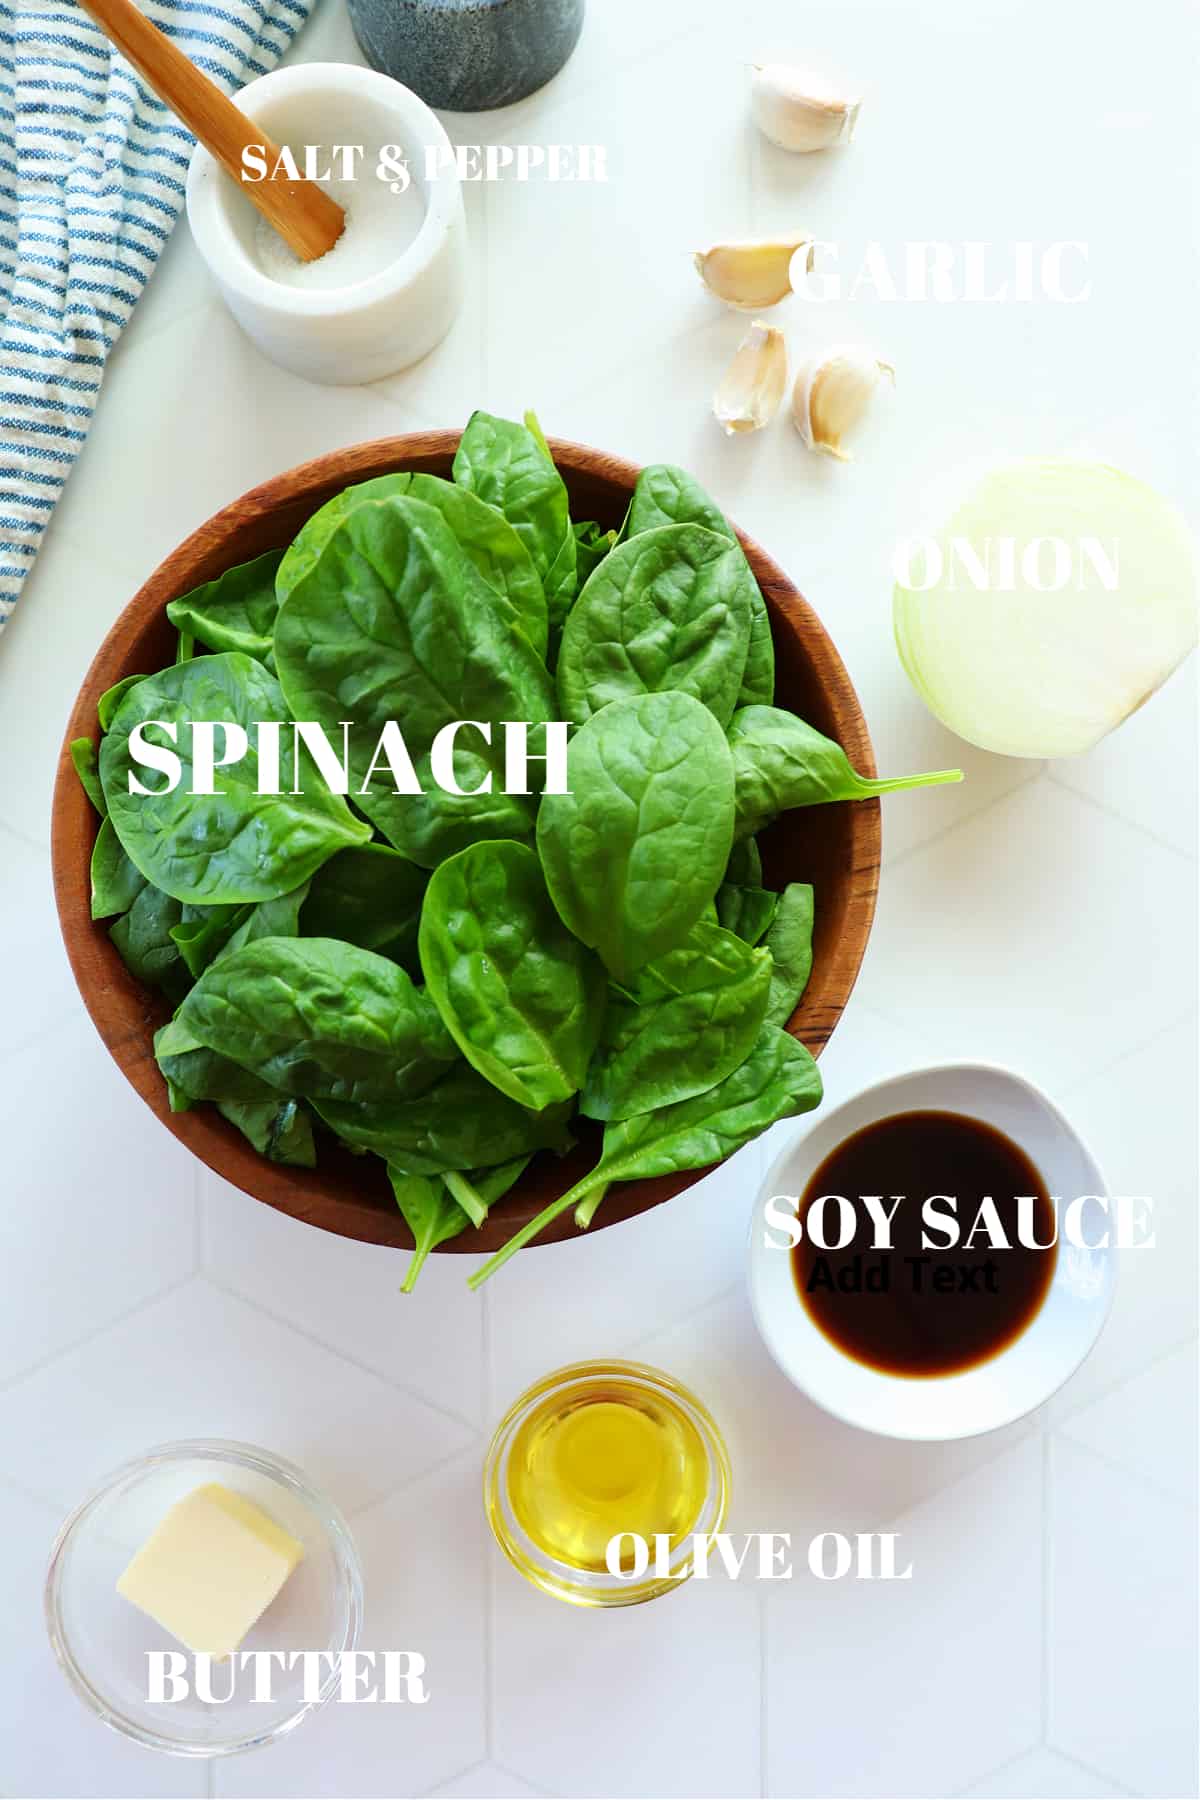 Fresh spinach, onion, garlic cloves, butter, olive oil and salt in bowls on a white board.